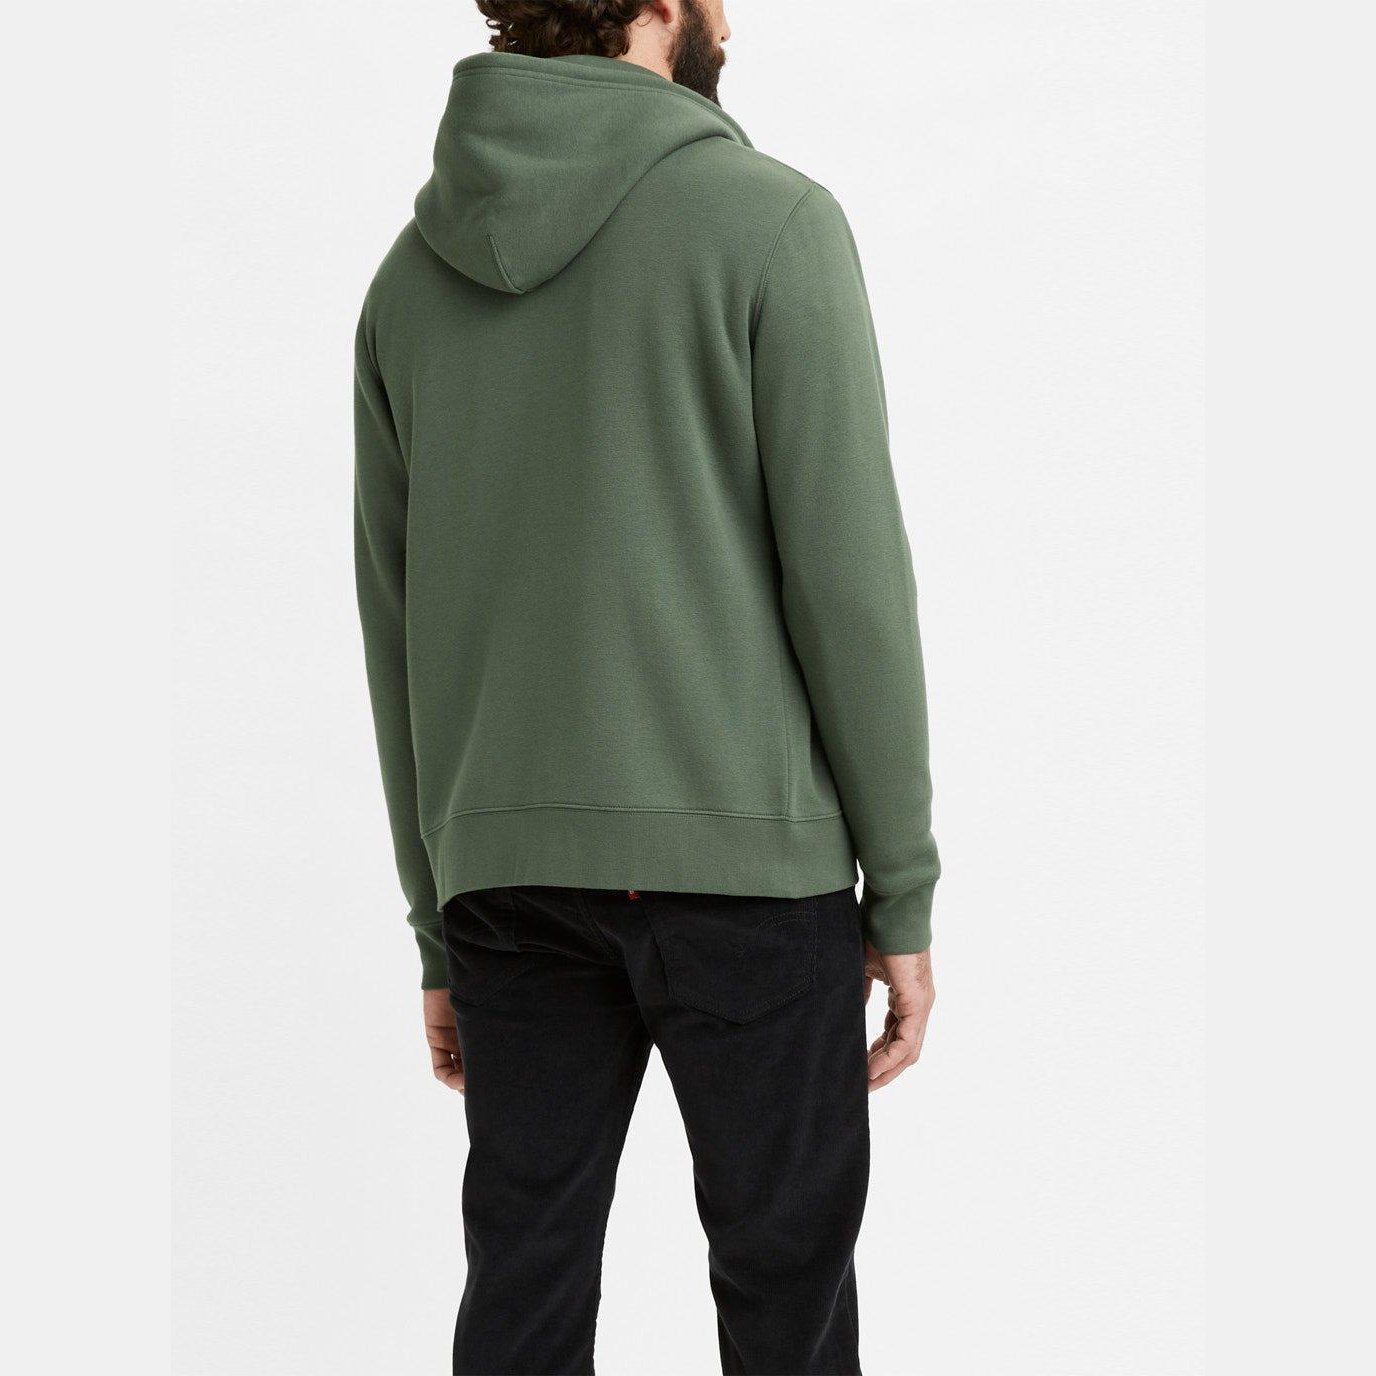 Levi's® Core Ng Zip Up Thyme For Men - Sporty Pro